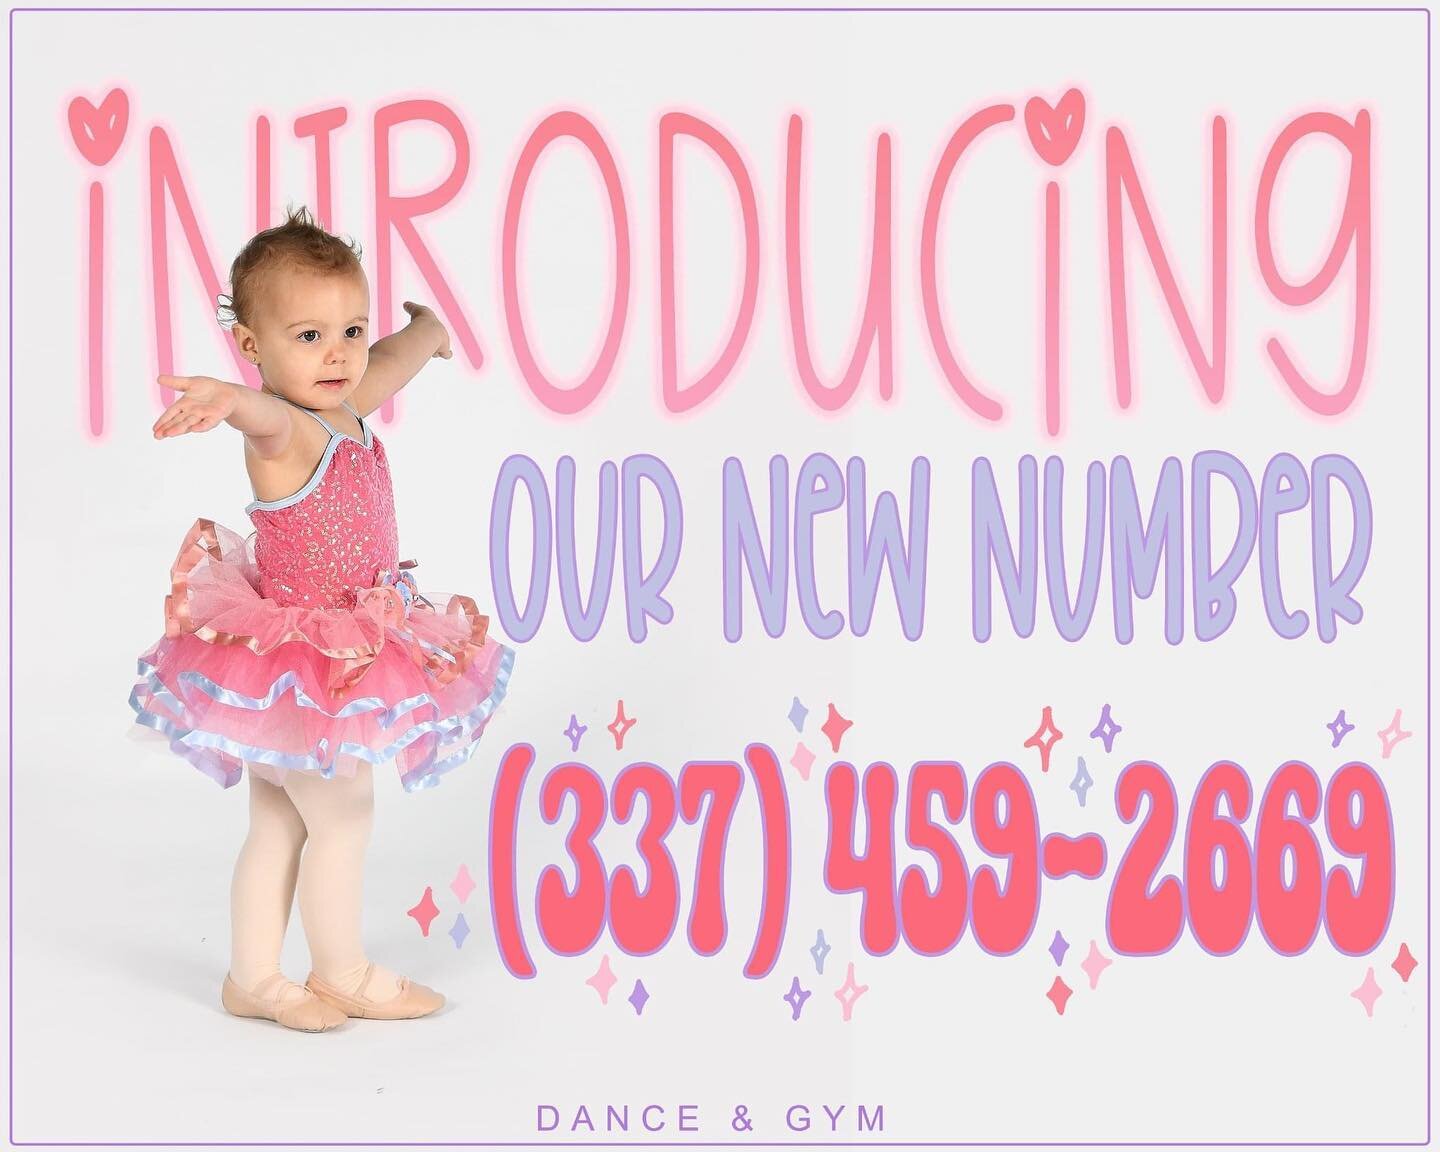 ✨We have a new phone number for the studio - (337)459-2669.✨ Please feel free to call or text with any questions.  We can also be reached through FB messenger or email address. 

⭐️The studio will be closed for the remainder of the month while our in